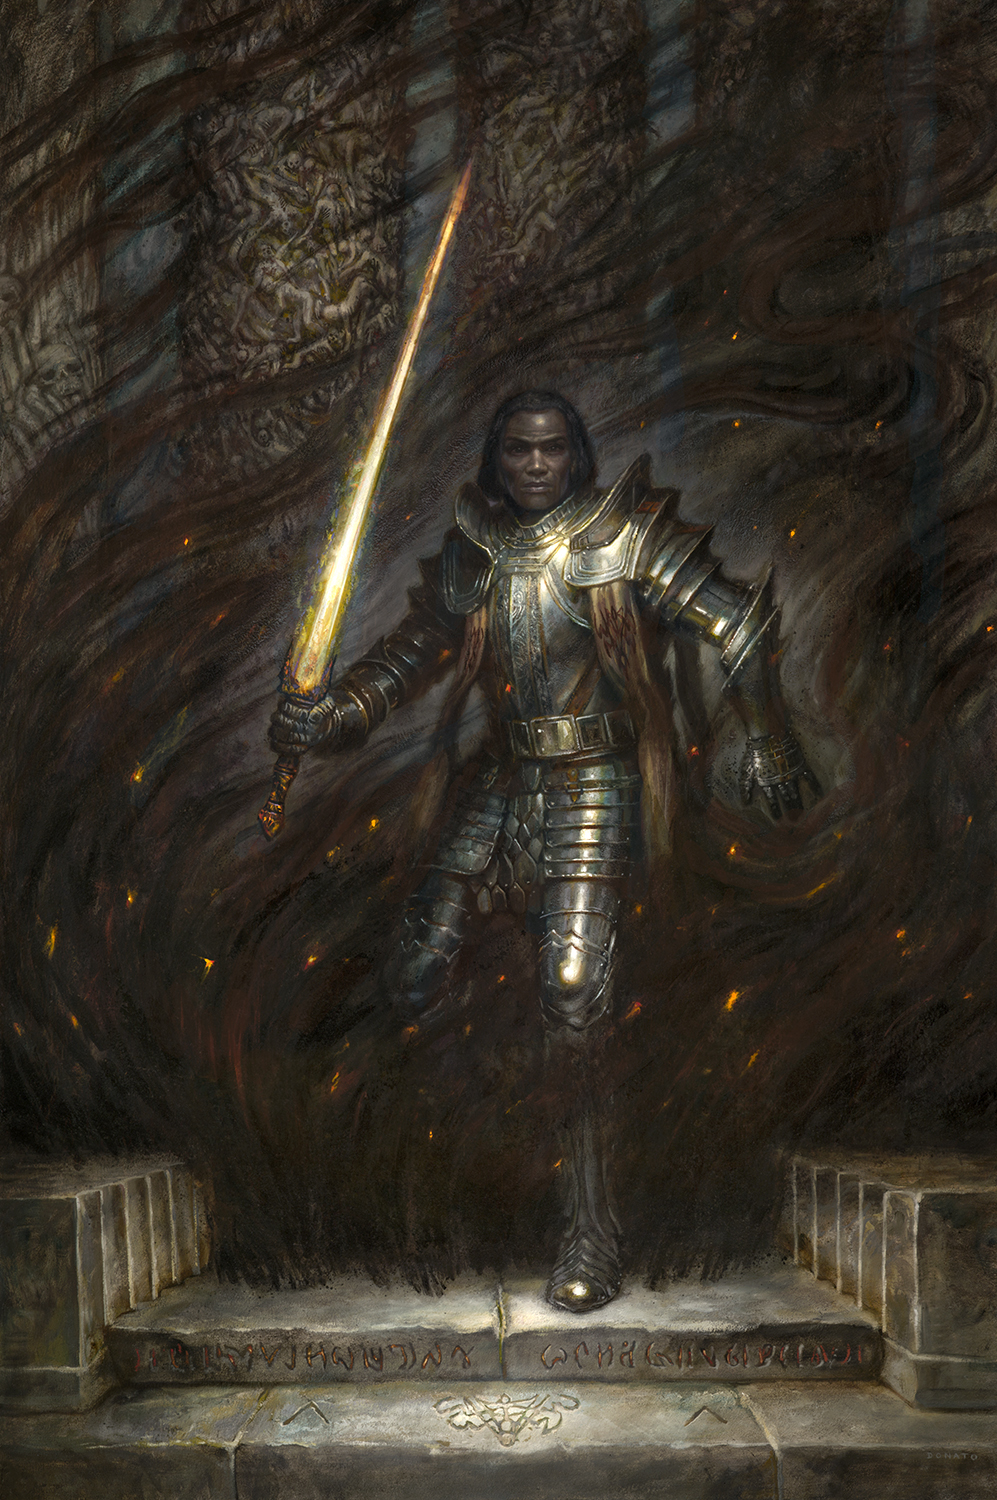 Stormlight Archive illustration of Taln by Donato Giancola